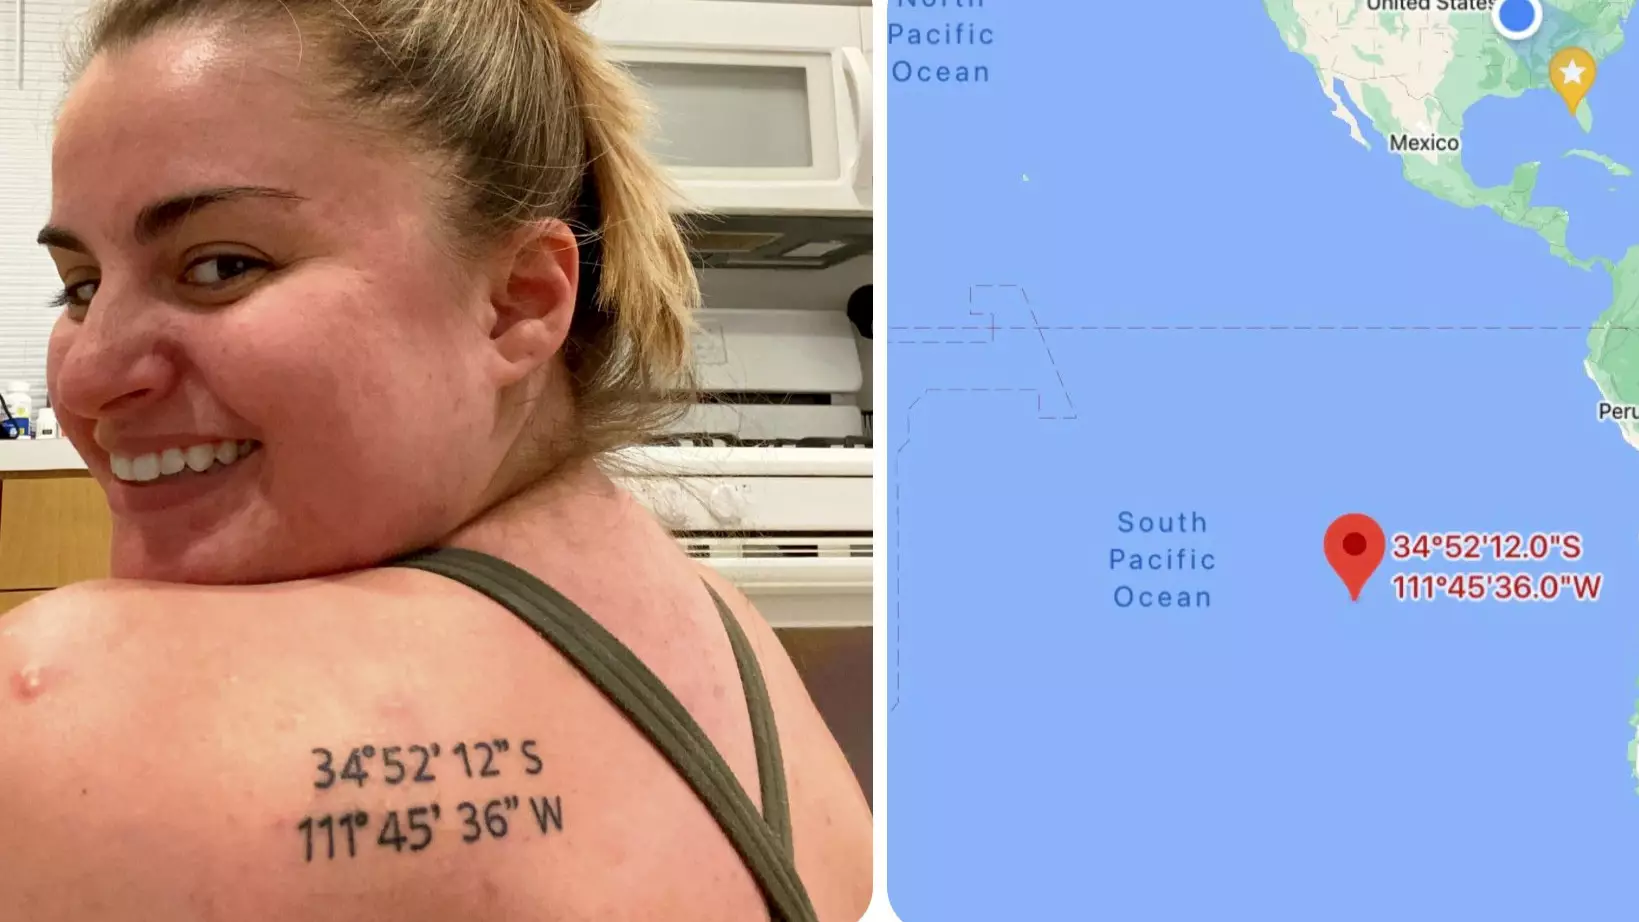 Woman Who Got Tattoo To Remember Holiday Gets Coordinates To Different Location